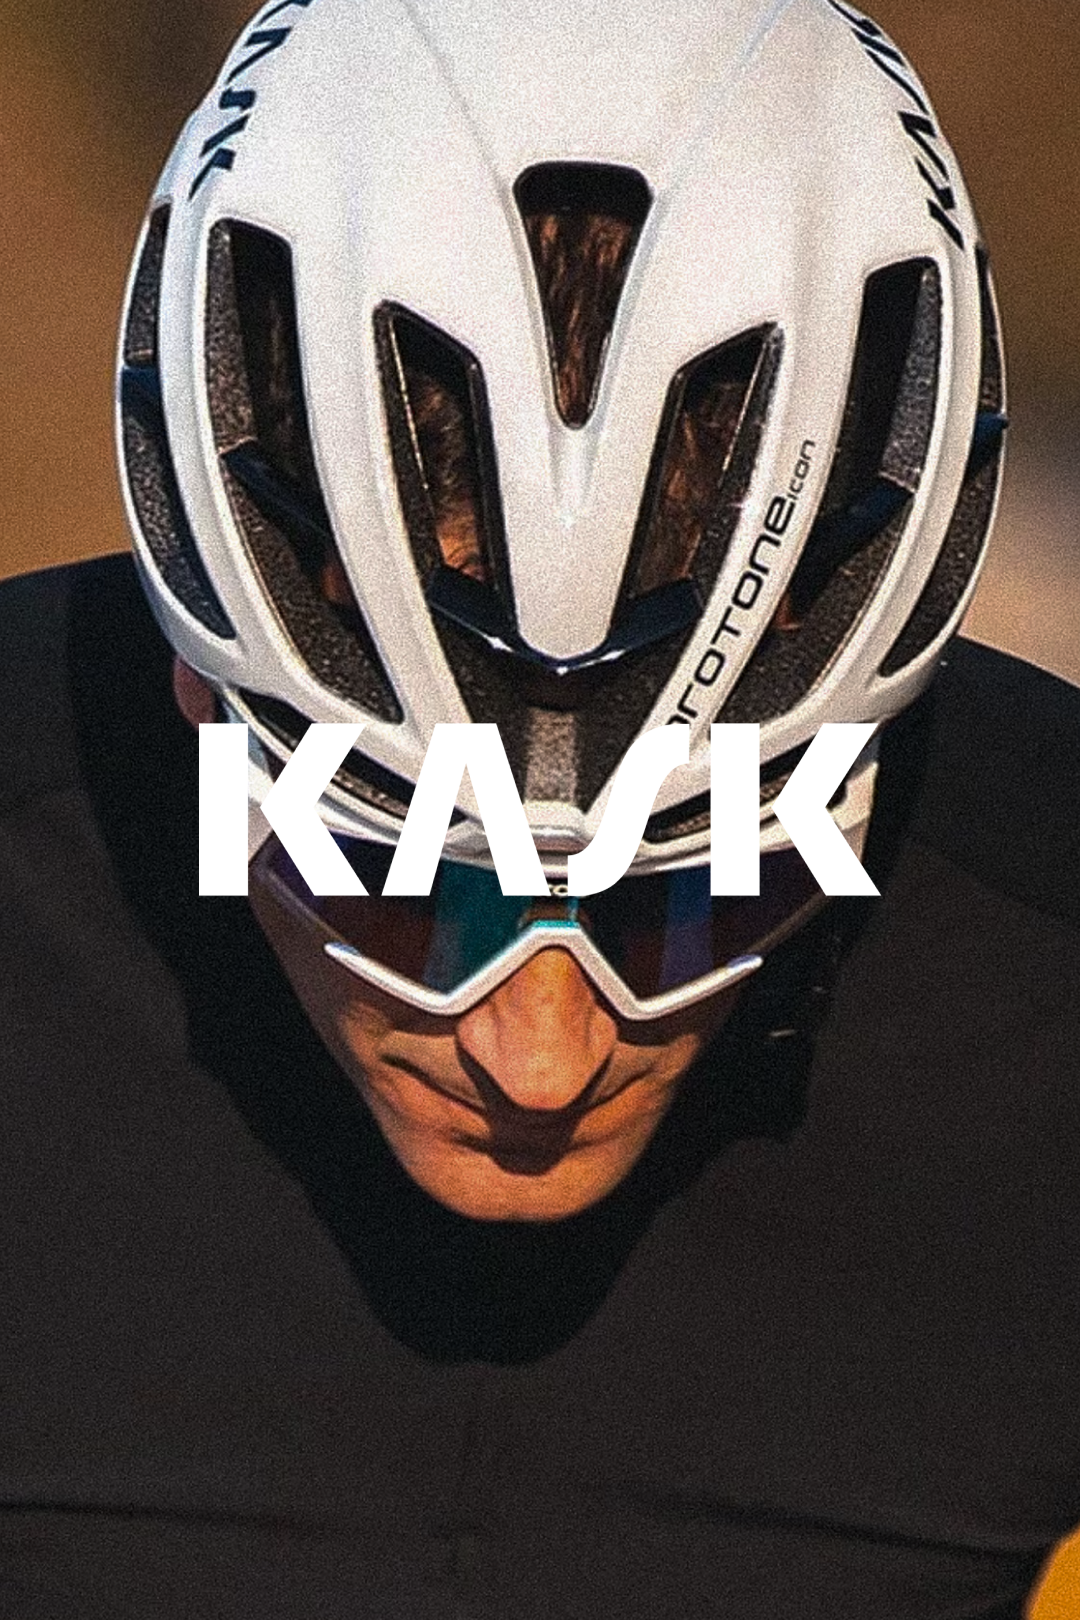 Cyclist looking downwards, featuring the aerodynamic design of a white KASK helmet @ Bici.